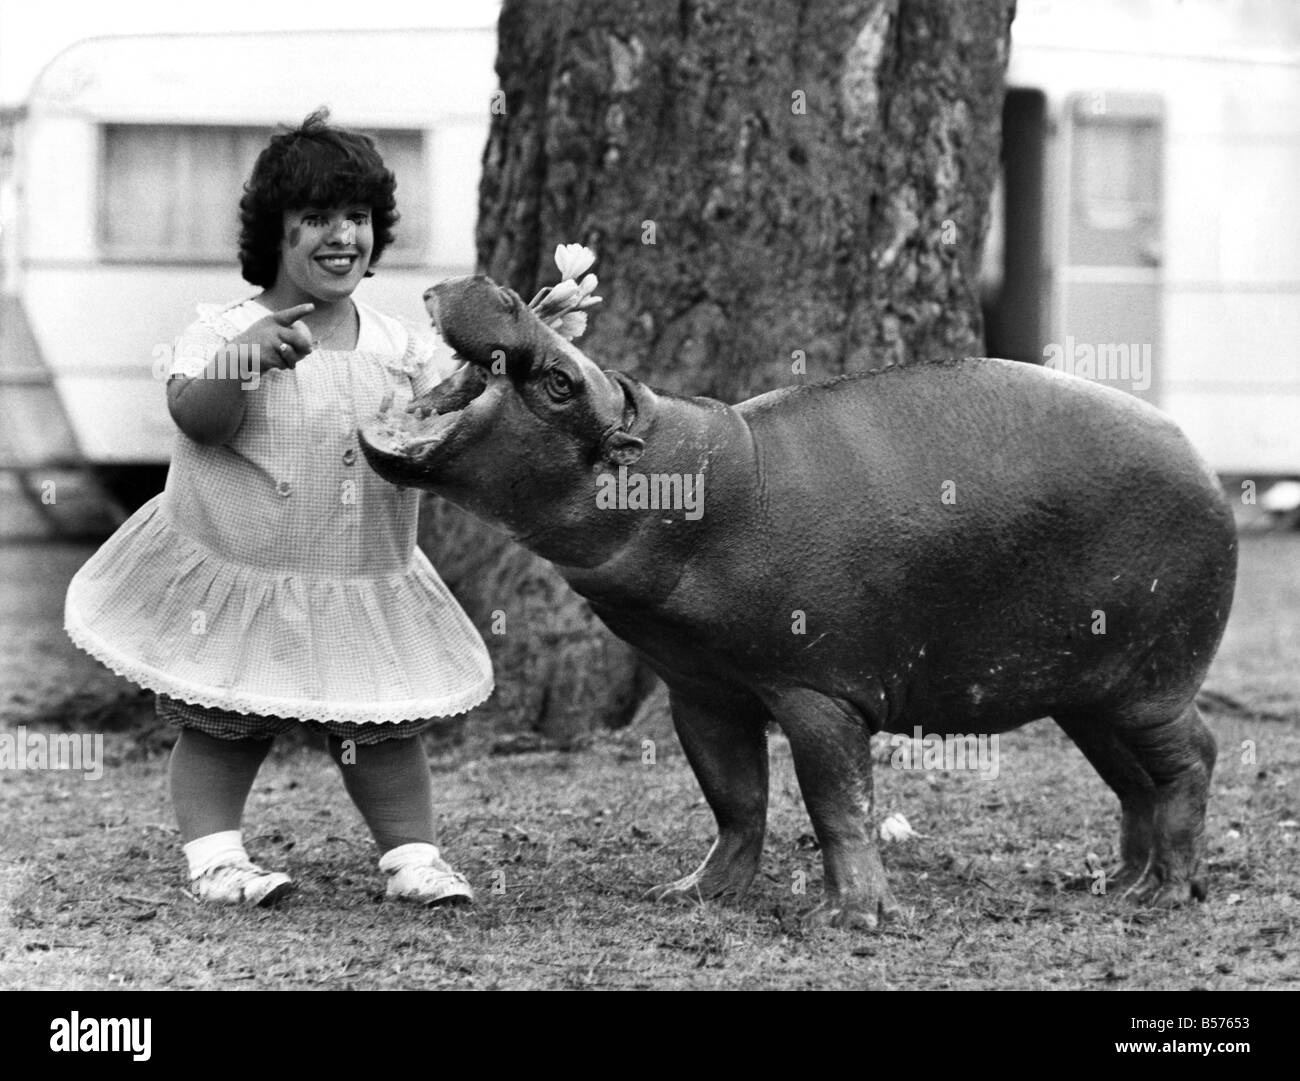 Where have all the flowers gone?, asks 23 yrs old Linda Ferry, a midget clown working with Gandy's travelling circus, as she peers into the open jaws of April, the four year old pygmy hippopotamus who is a star performer with the circus. March 1985 P004876 Stock Photo